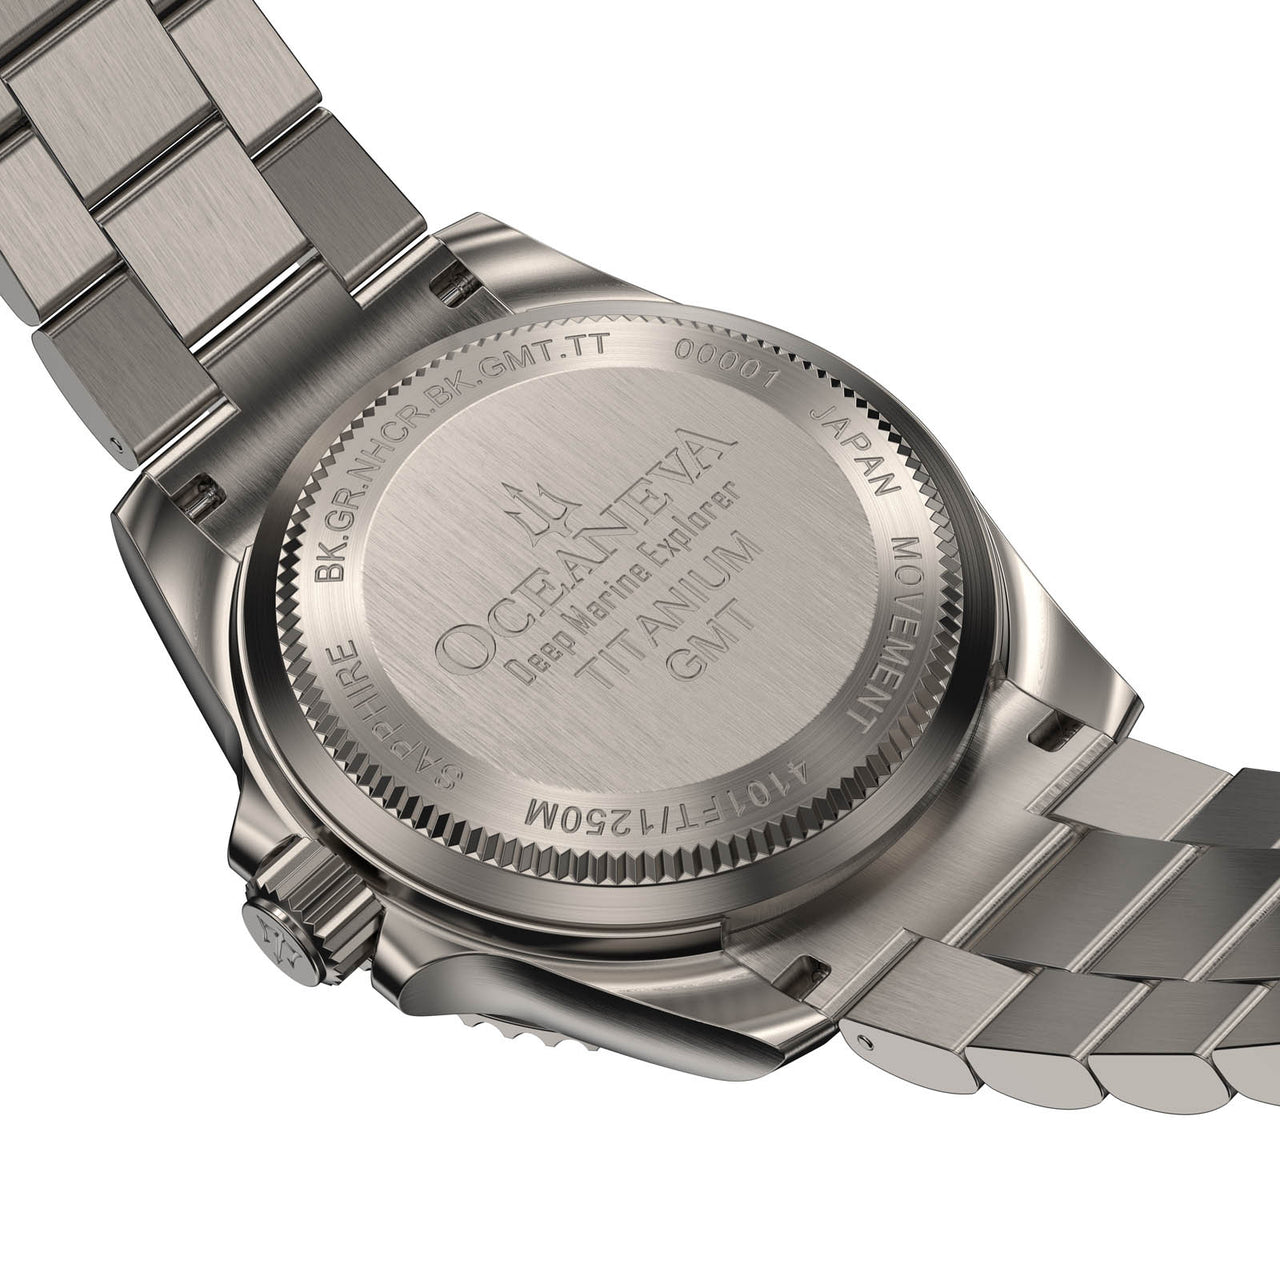 Precision-crafted Oceaneva Titanium Watch with Individual Serial Numbe